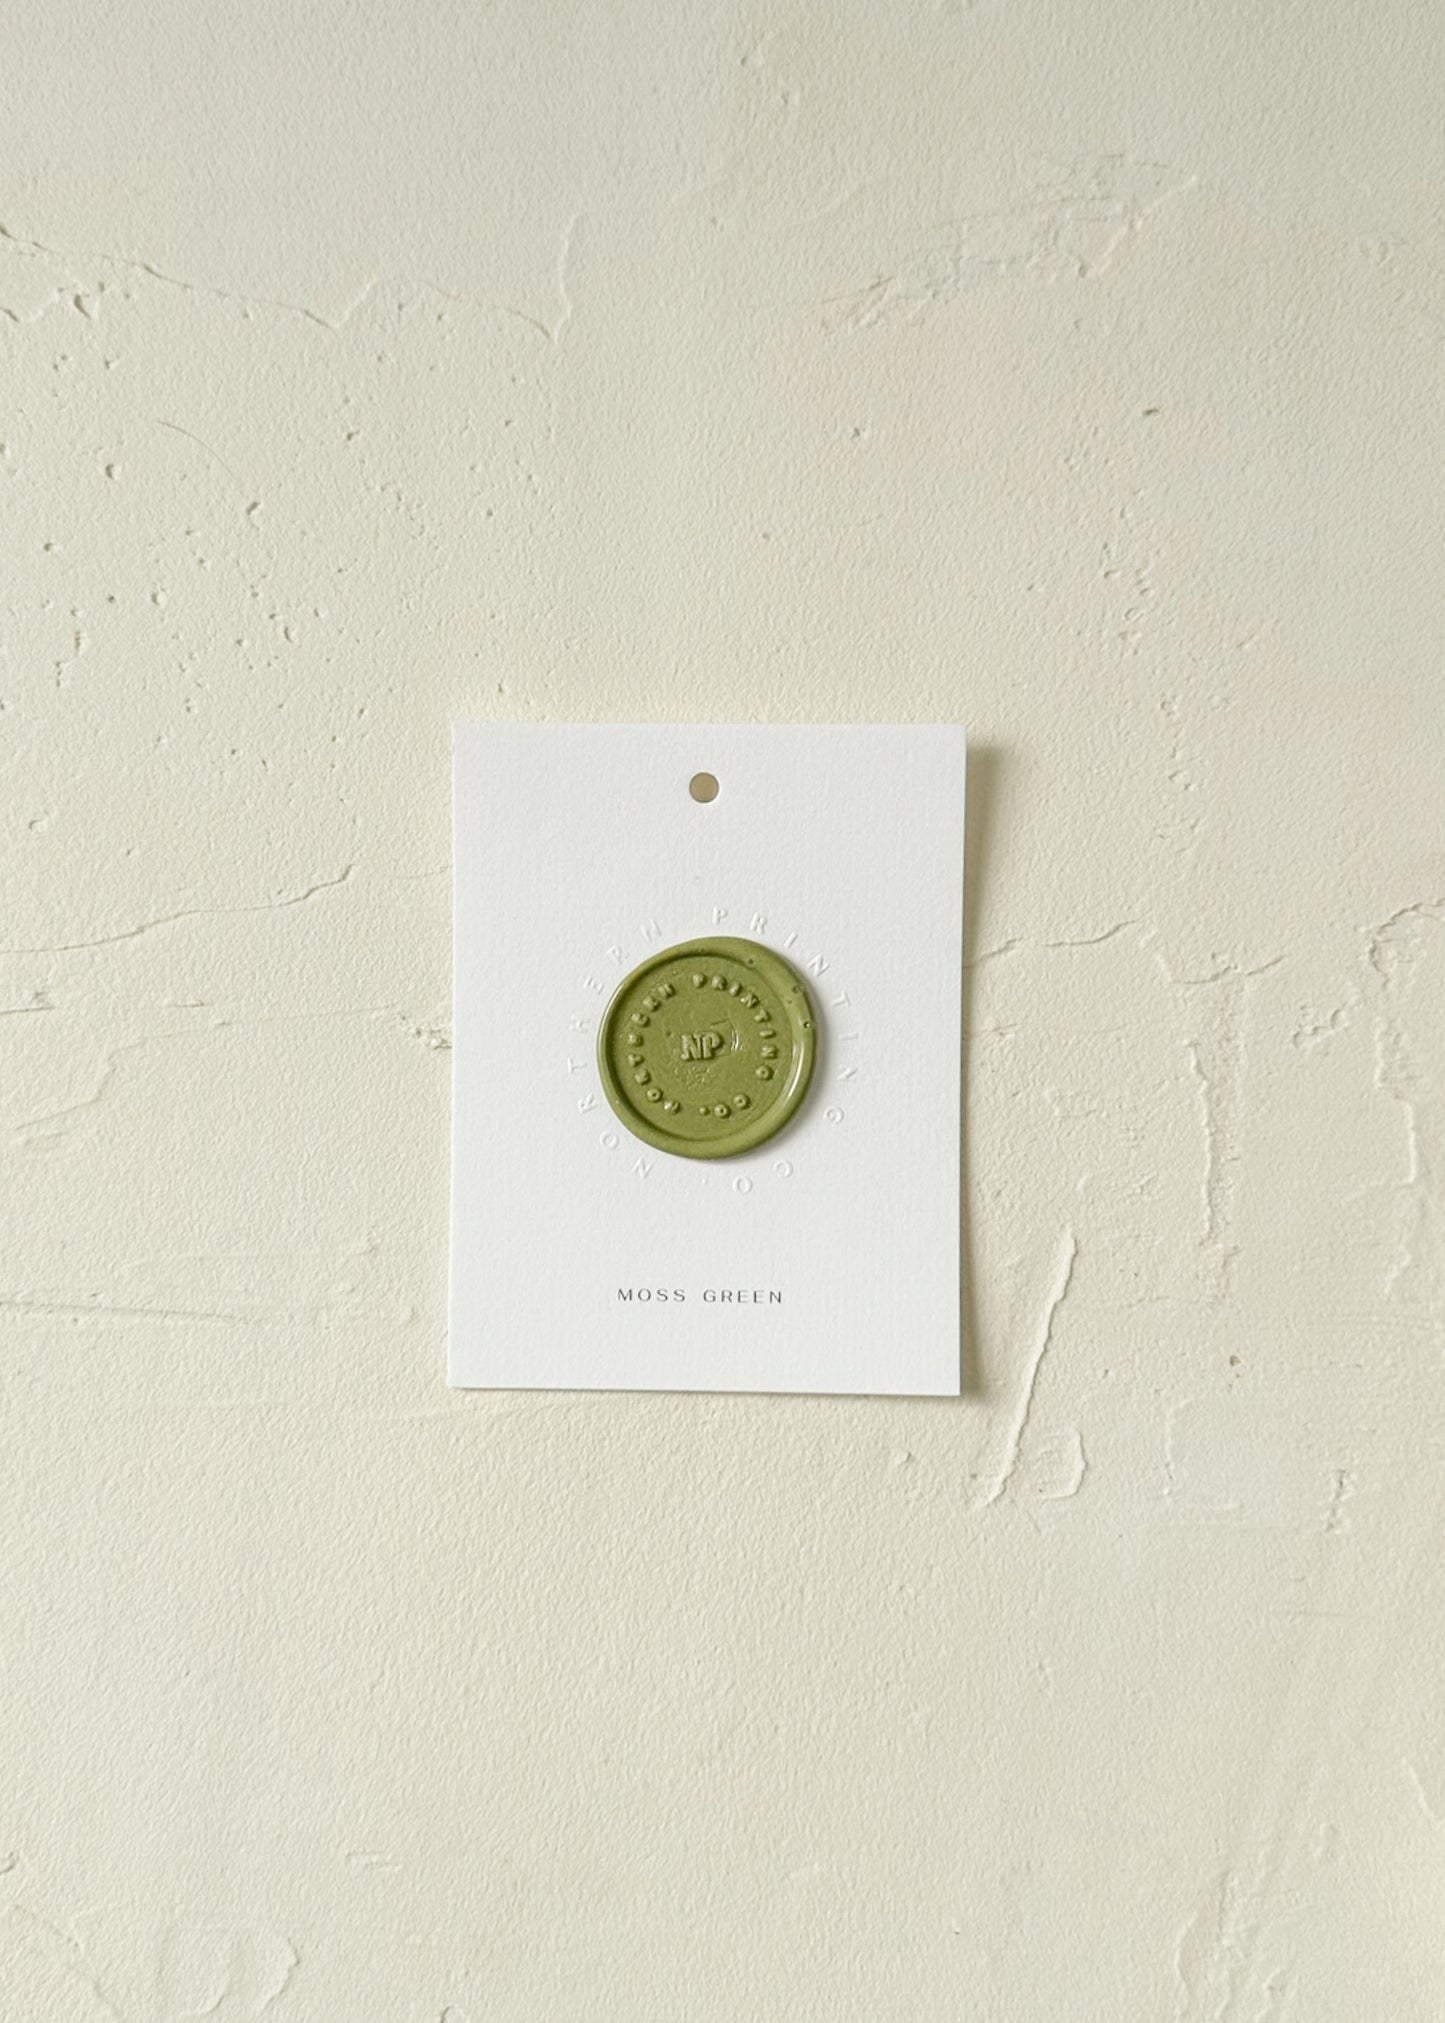 Elevated view of Moss Green wax seal stamp sample on textured background